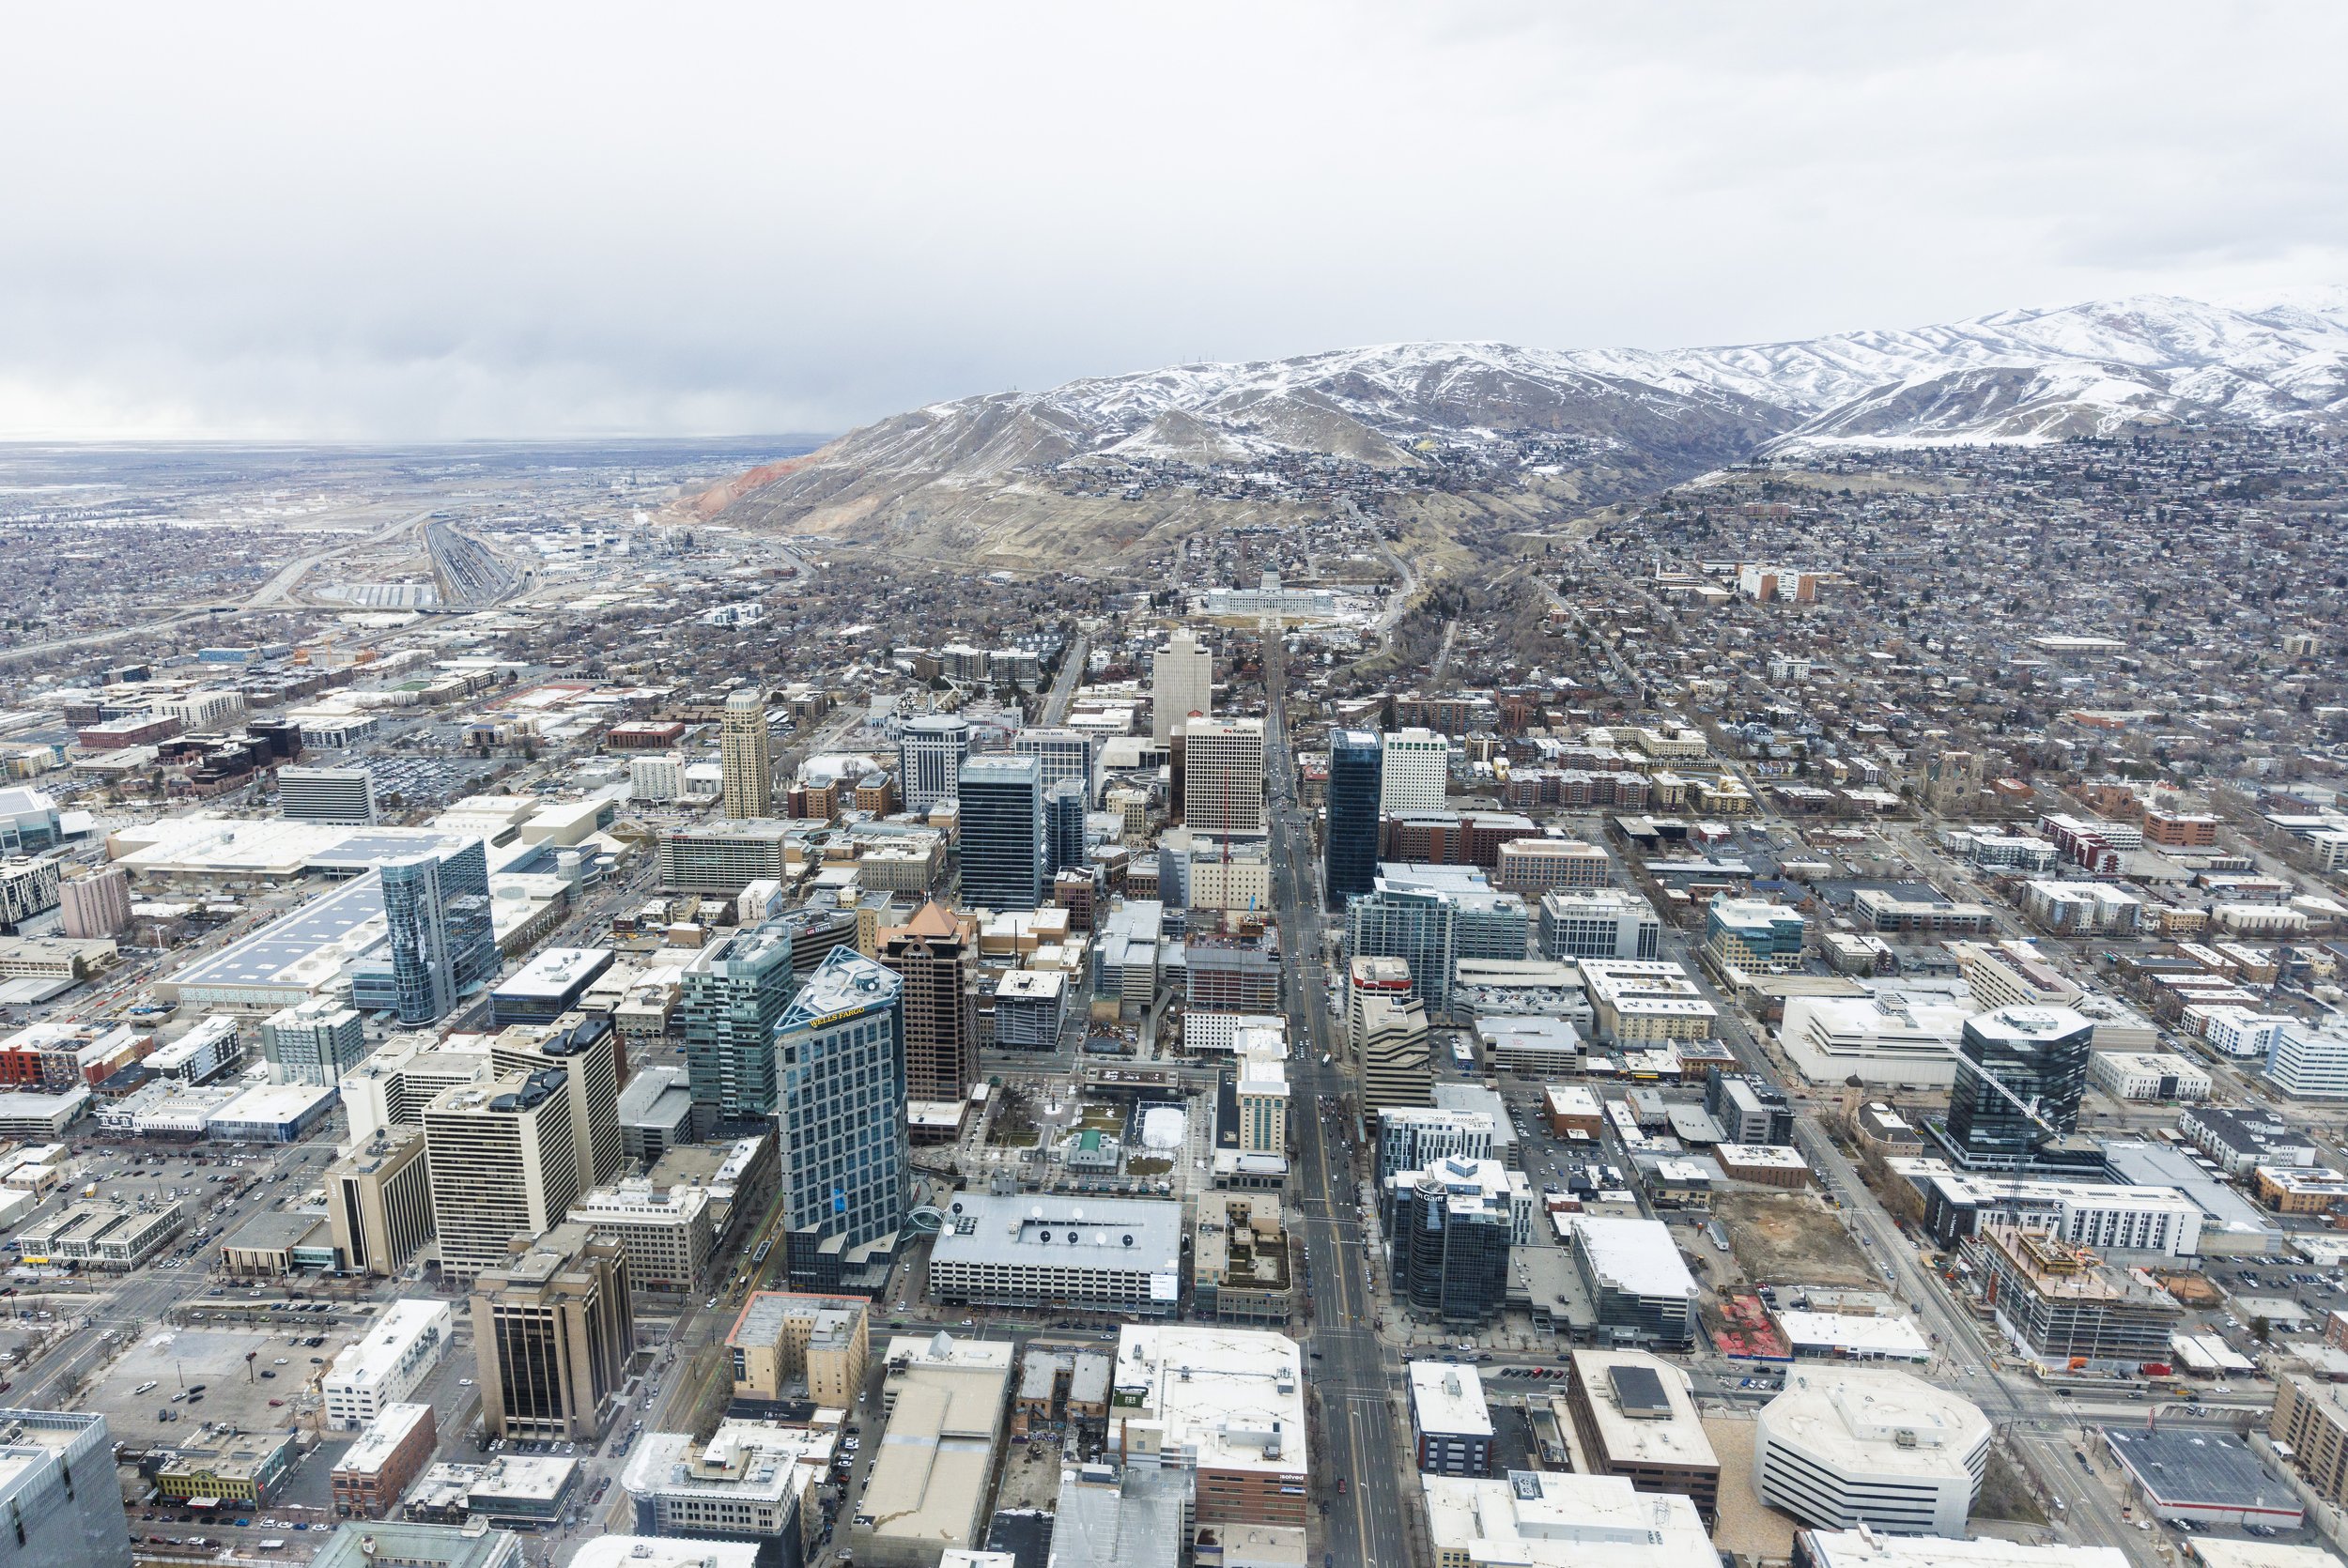  View of the Salt Lake City Valley by Savanna Richardson Photography during a helicopter proposal. lavish proposal engagement photography SLC engagements #SavannaRichardsonPhotography #SavannaRichardsonEngagements #utahproposals #helicopterproposal #